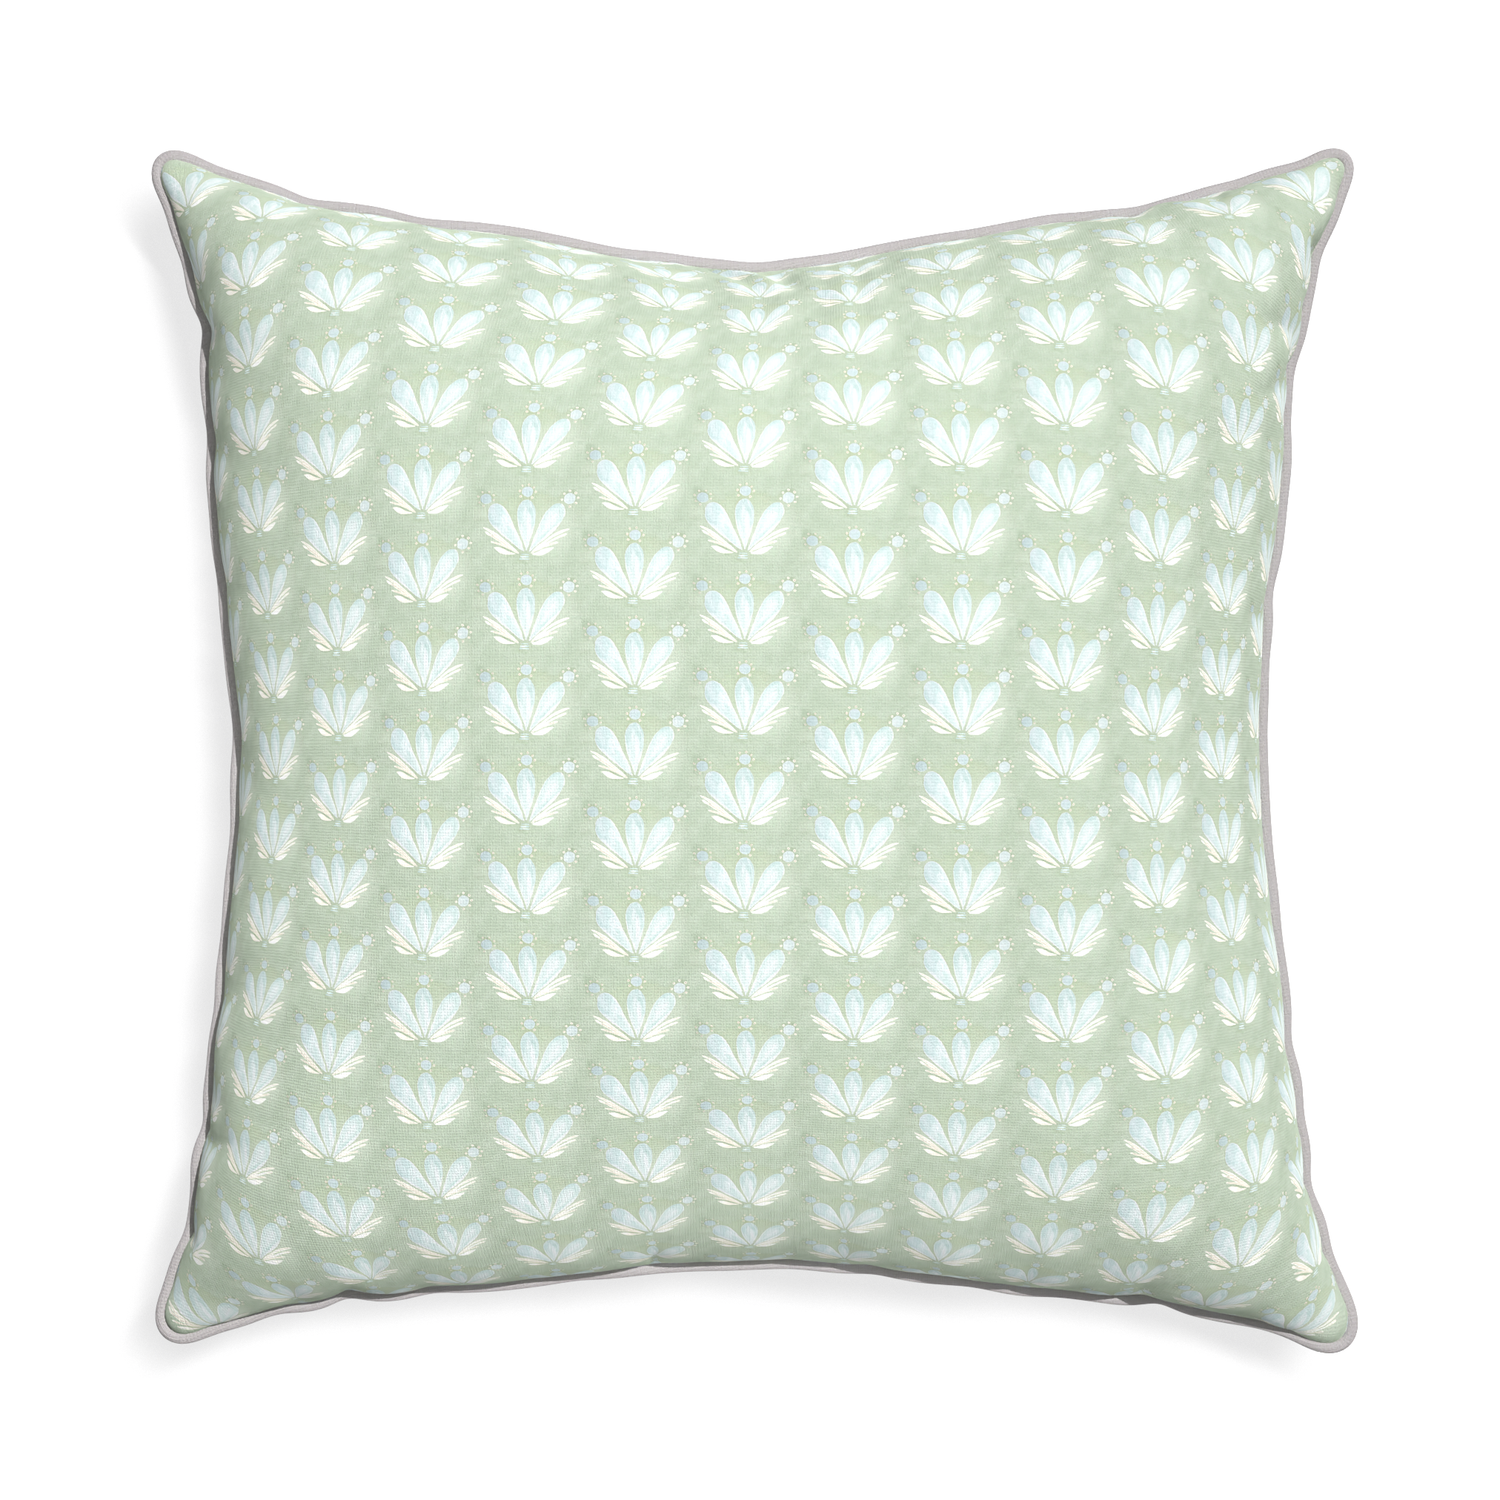 Euro-sham serena sea salt custom blue & green floral drop repeatpillow with pebble piping on white background